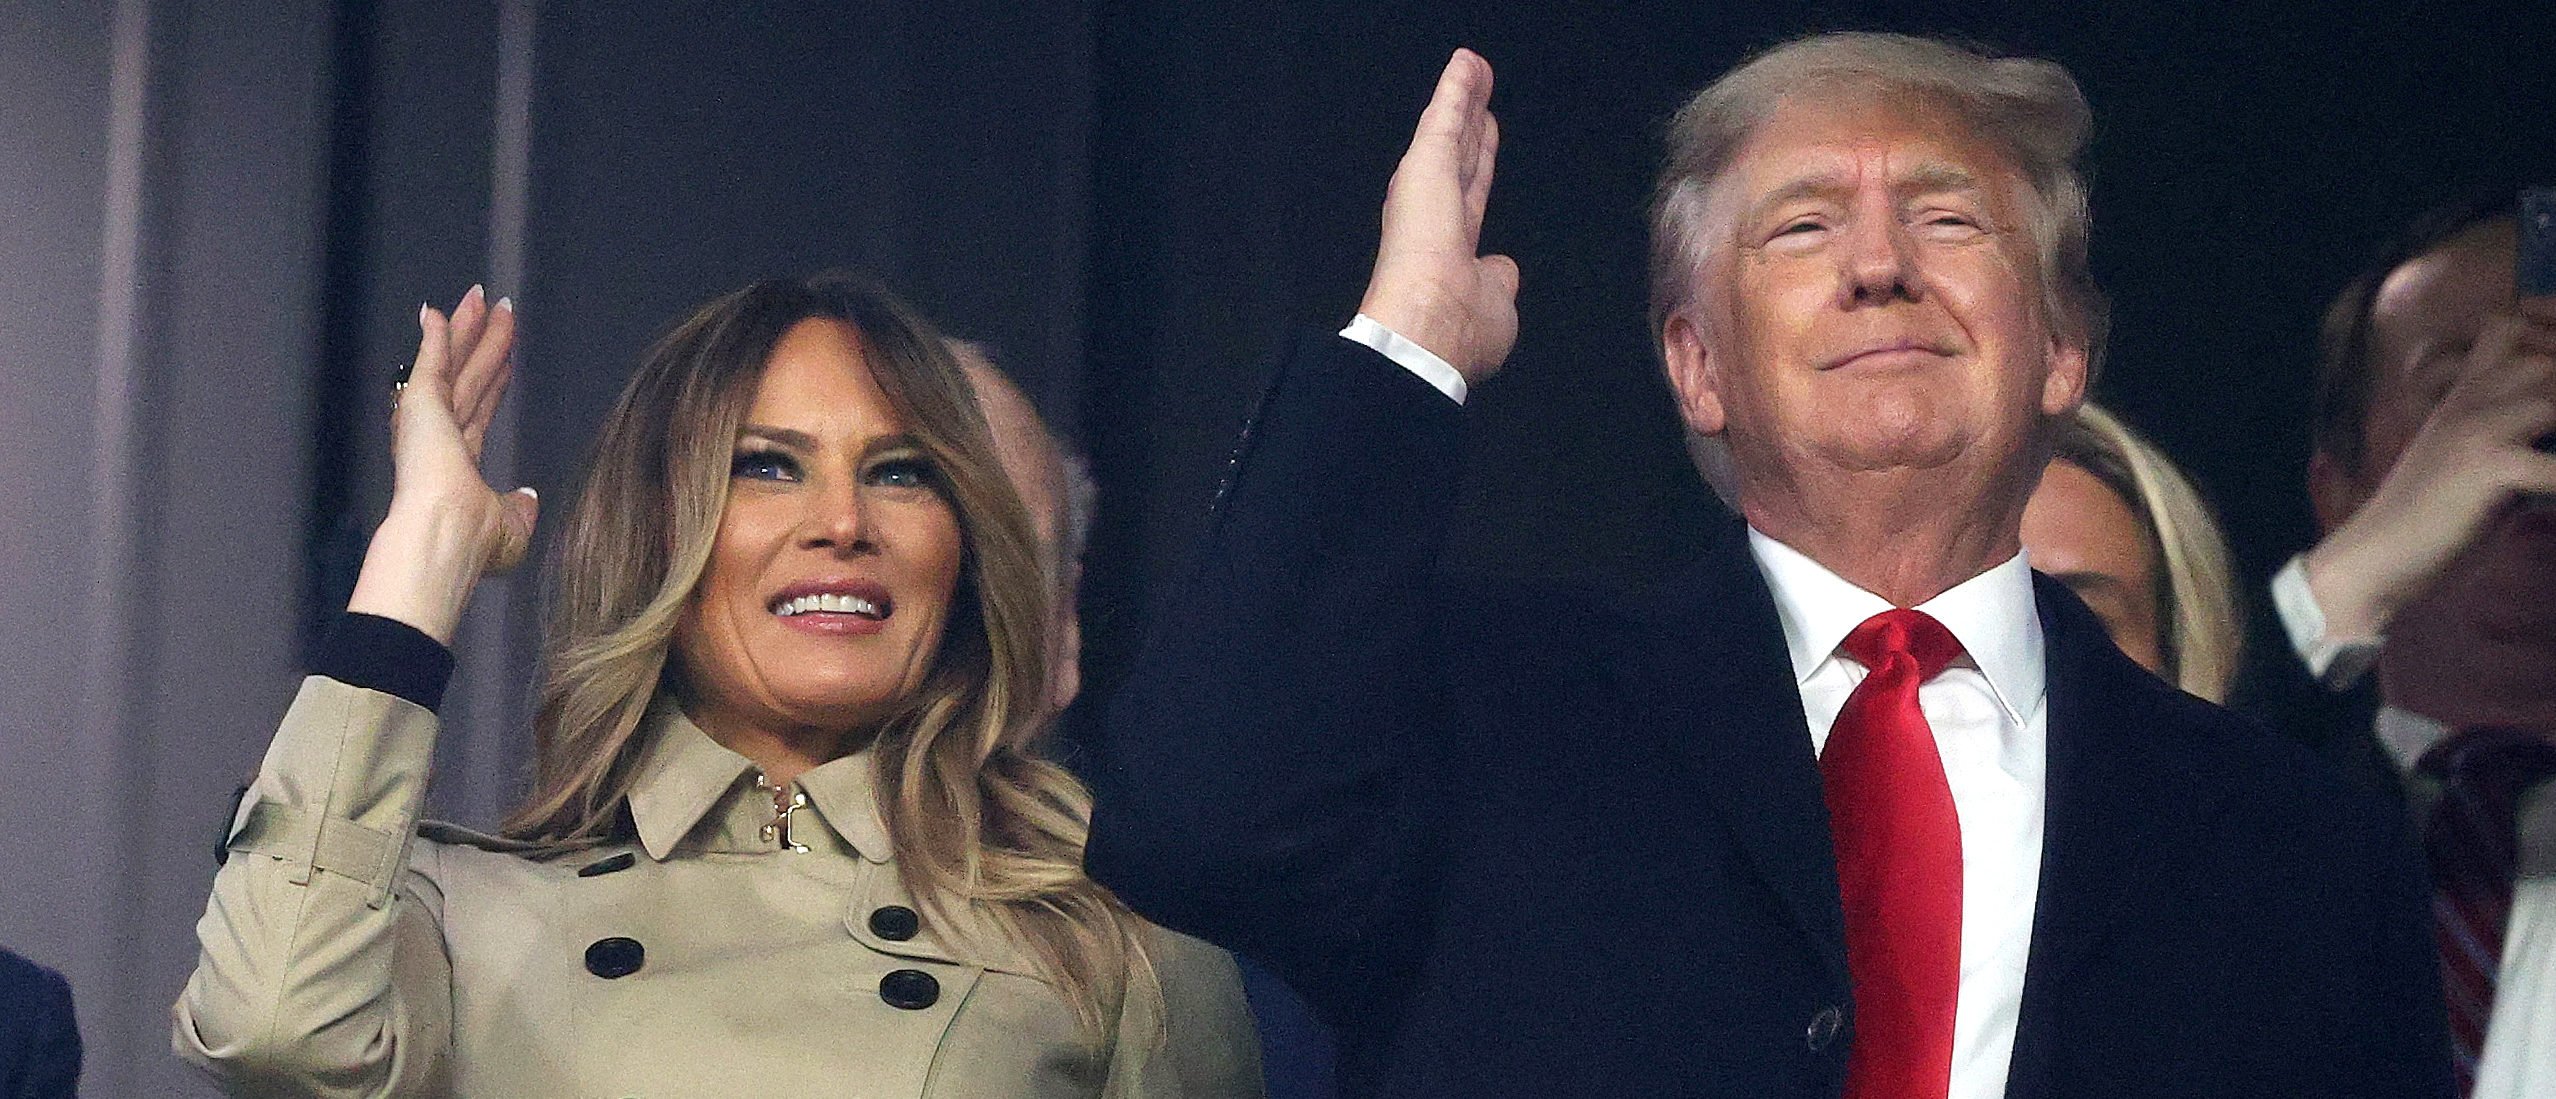 ATLANTA, GEORGIA - OCTOBER 30: Former first lady and president of the United States Melania and Donald Trump do "the chop" prior to Game Four of the World Series between the Houston Astros and the Atlanta Braves Truist Park on October 30, 2021 in Atlanta, Georgia. (Photo by Elsa/Getty Images)